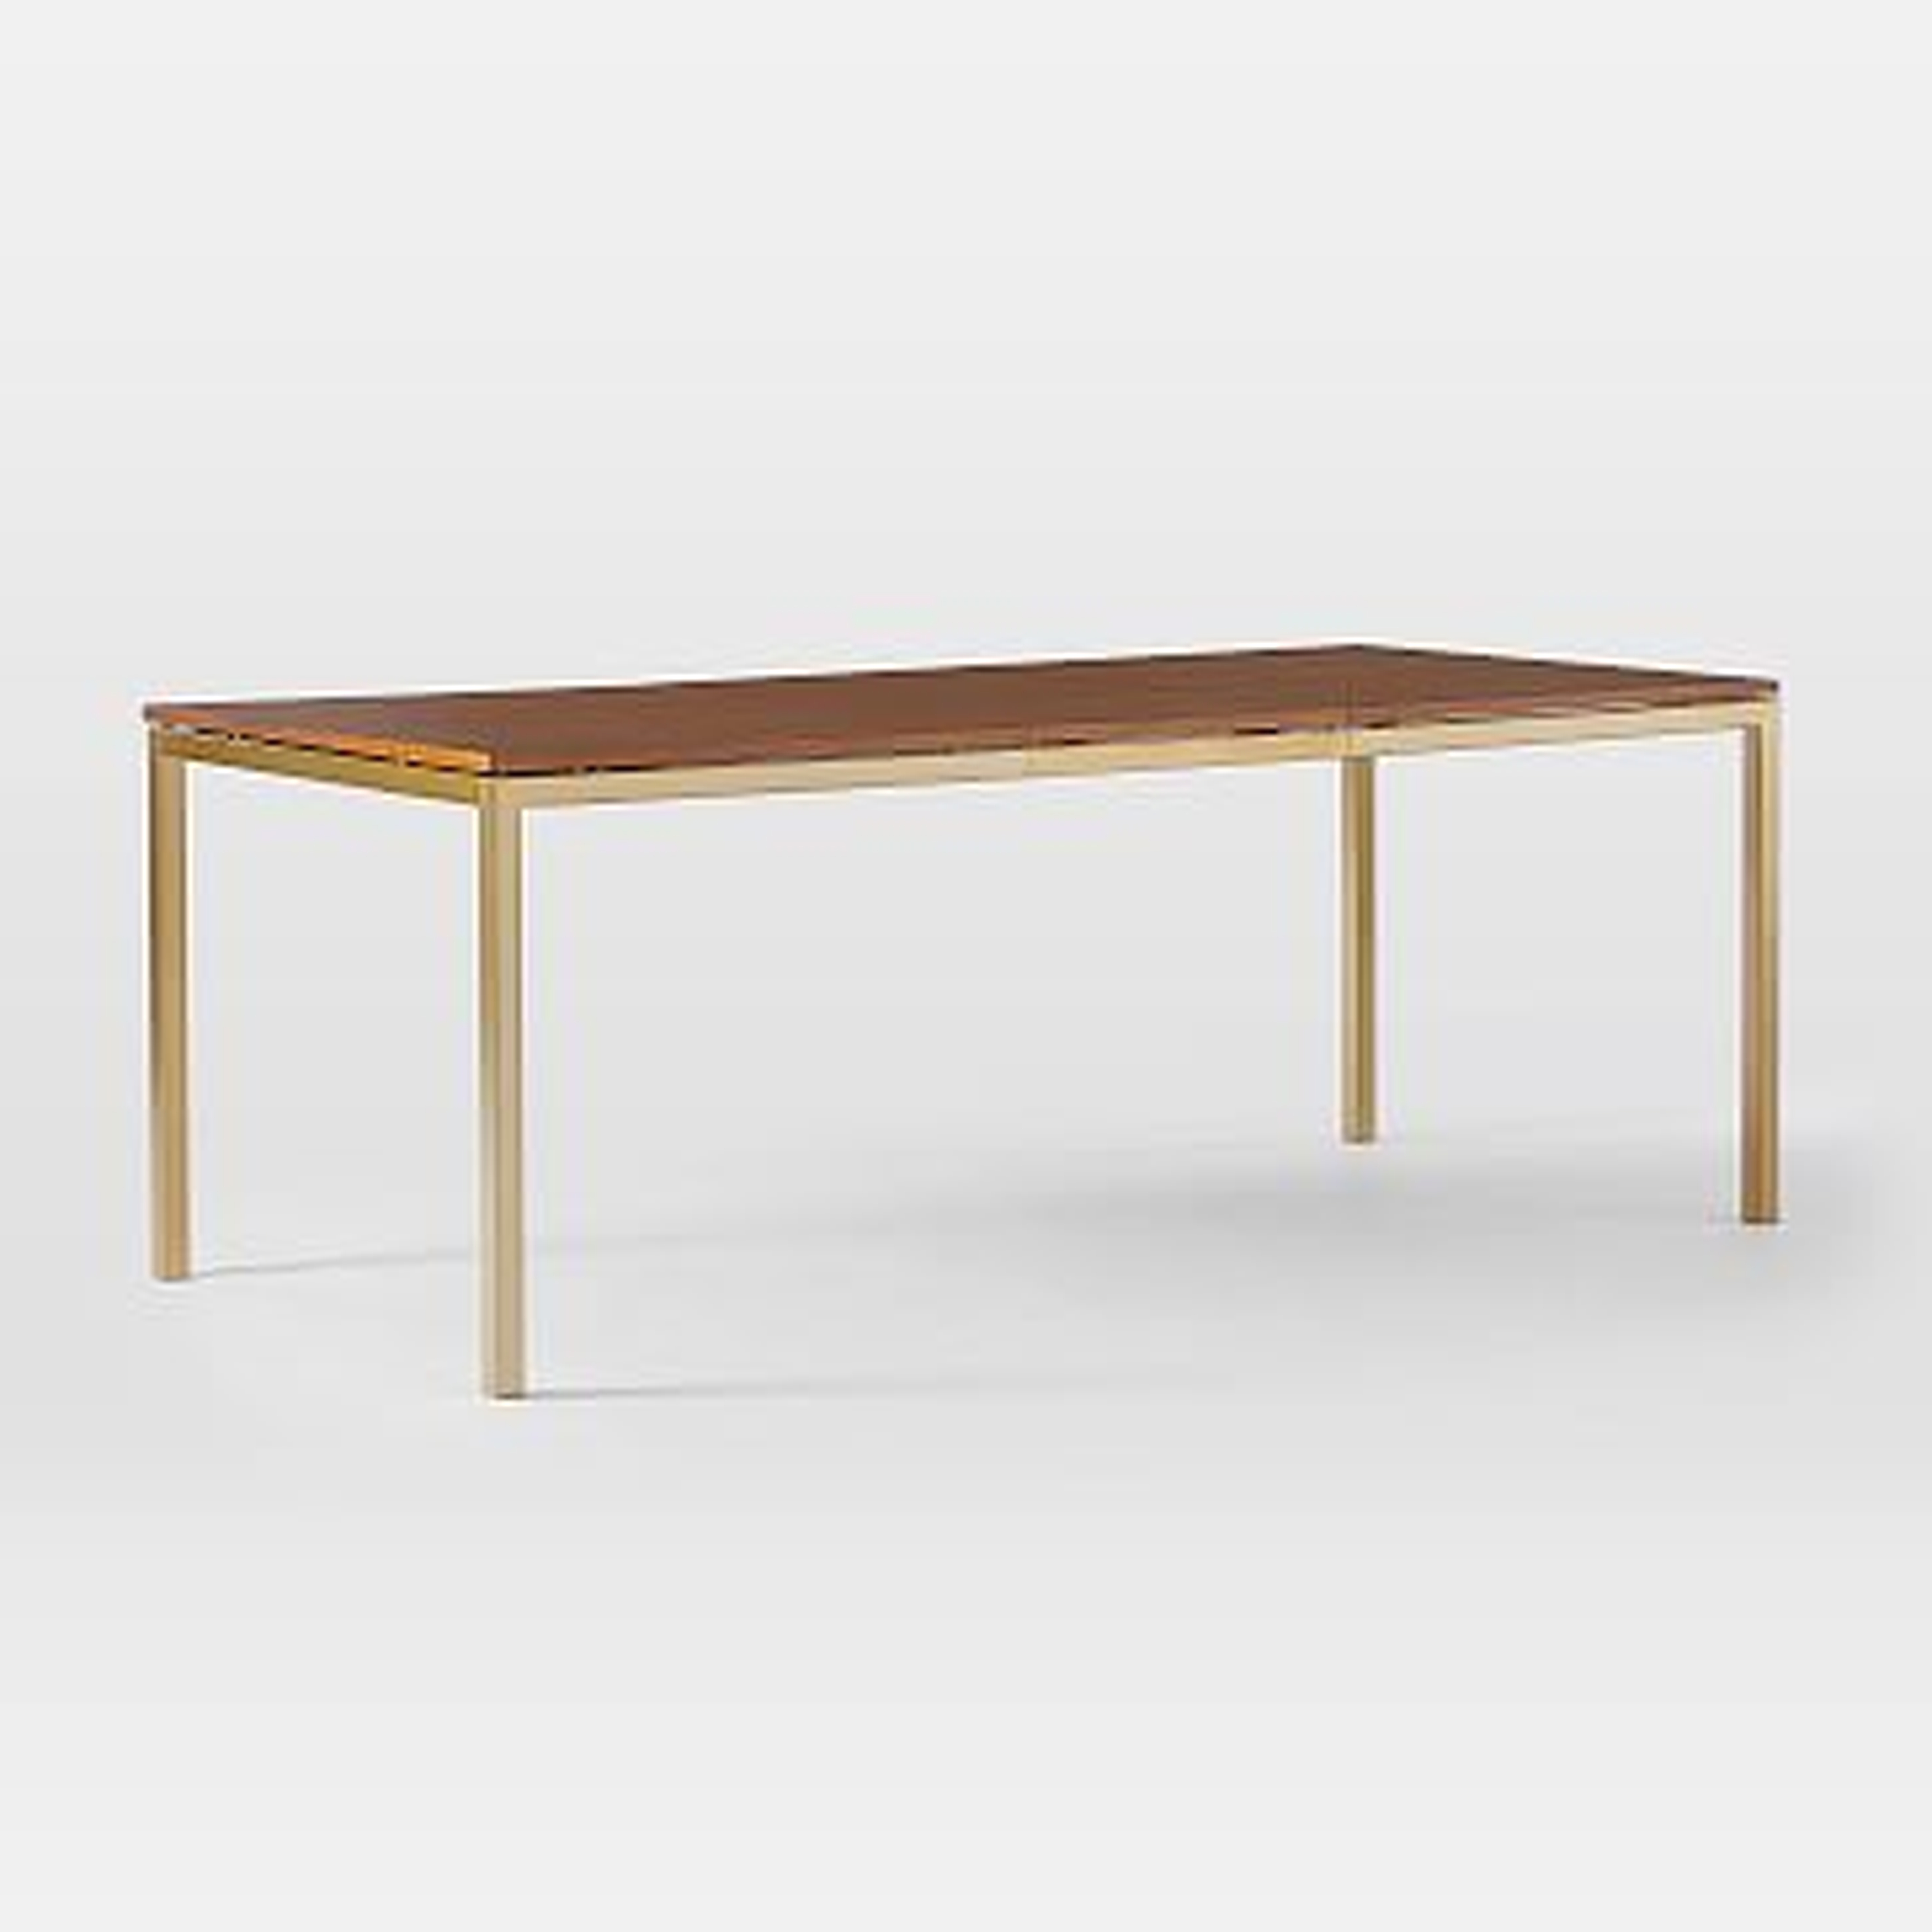 Frame Expandable Dining Table, Walnut, Antique Brass - West Elm